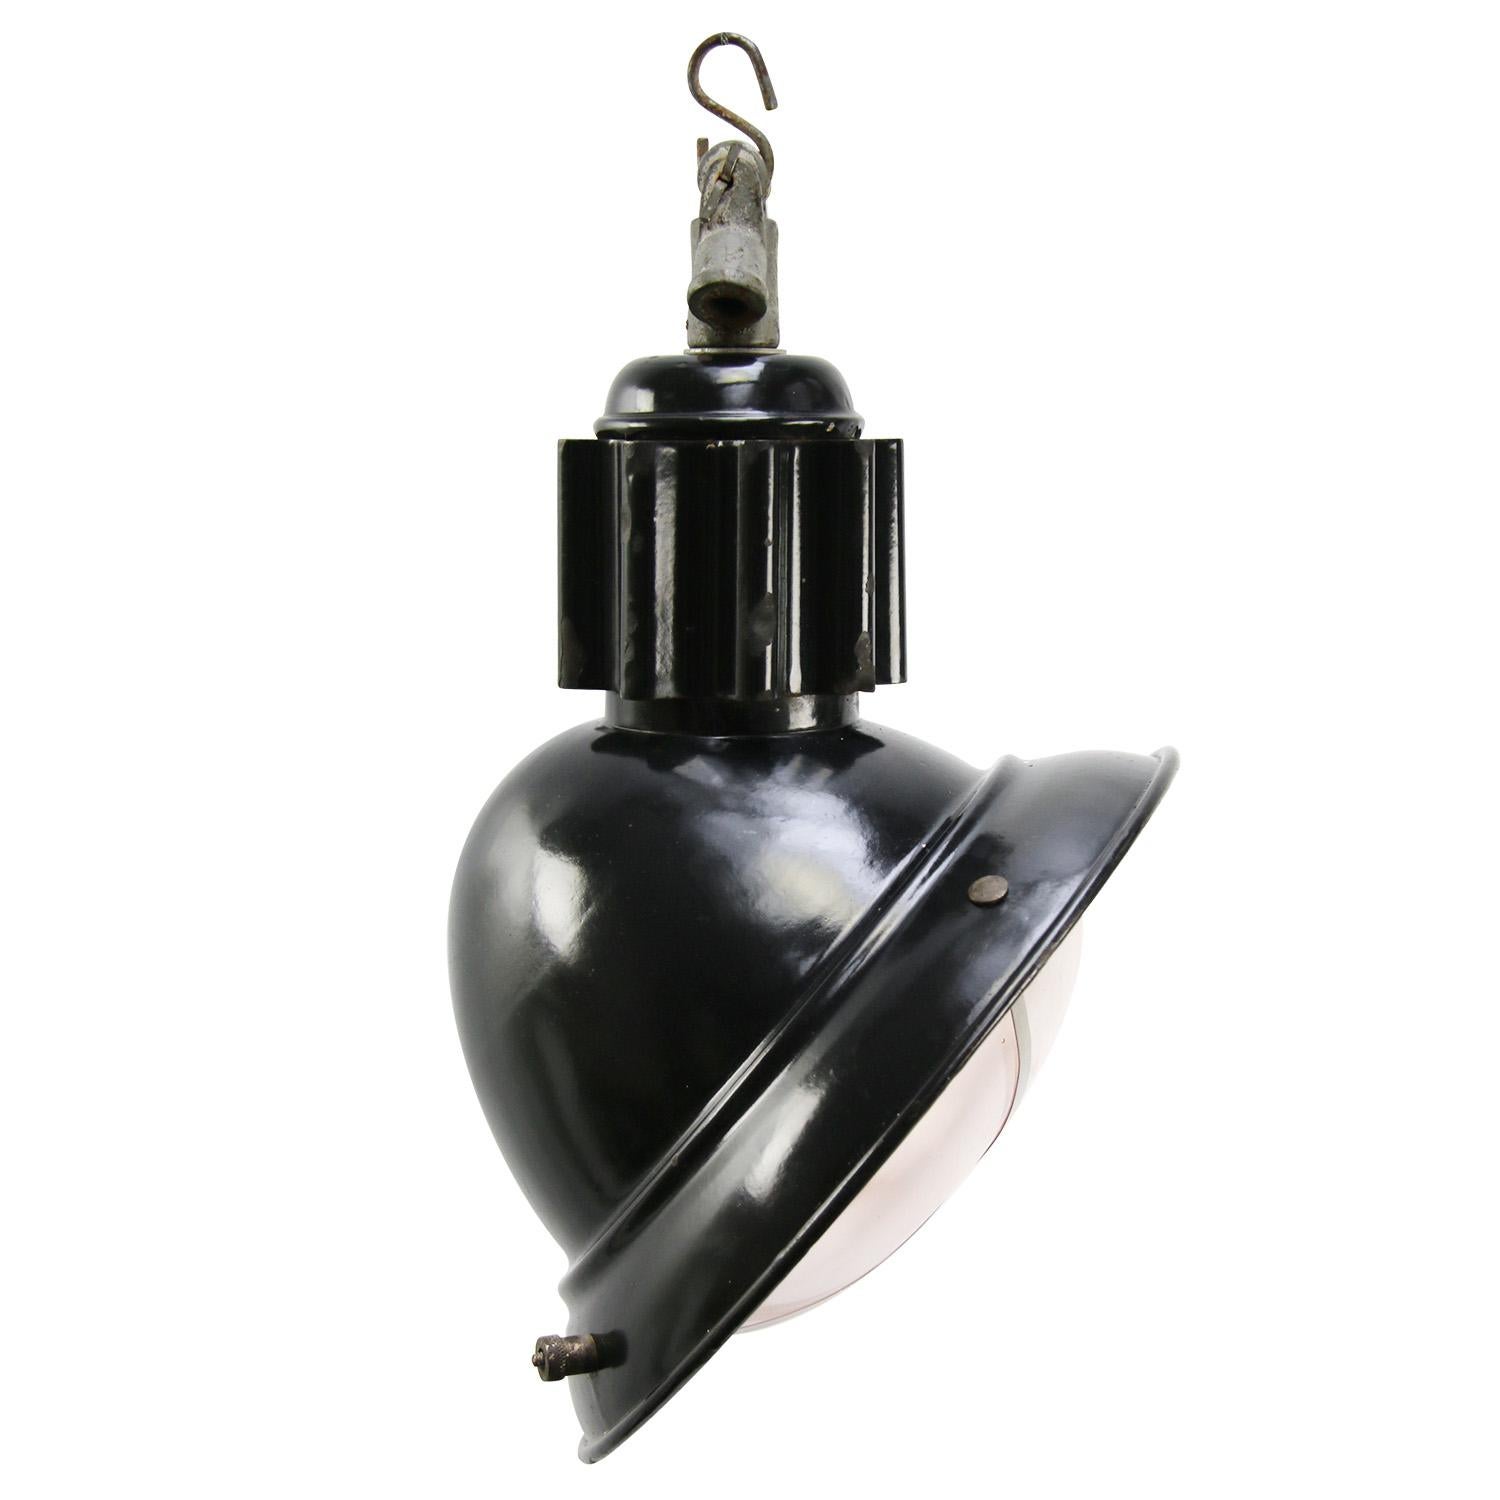 French asymmetrical black industrial lamp with round clear glass.
Black enamel. Rare model.

Weight: 3.00 kg / 6.6 lb

Priced per individual item. All lamps have been made suitable by international standards for incandescent light bulbs,